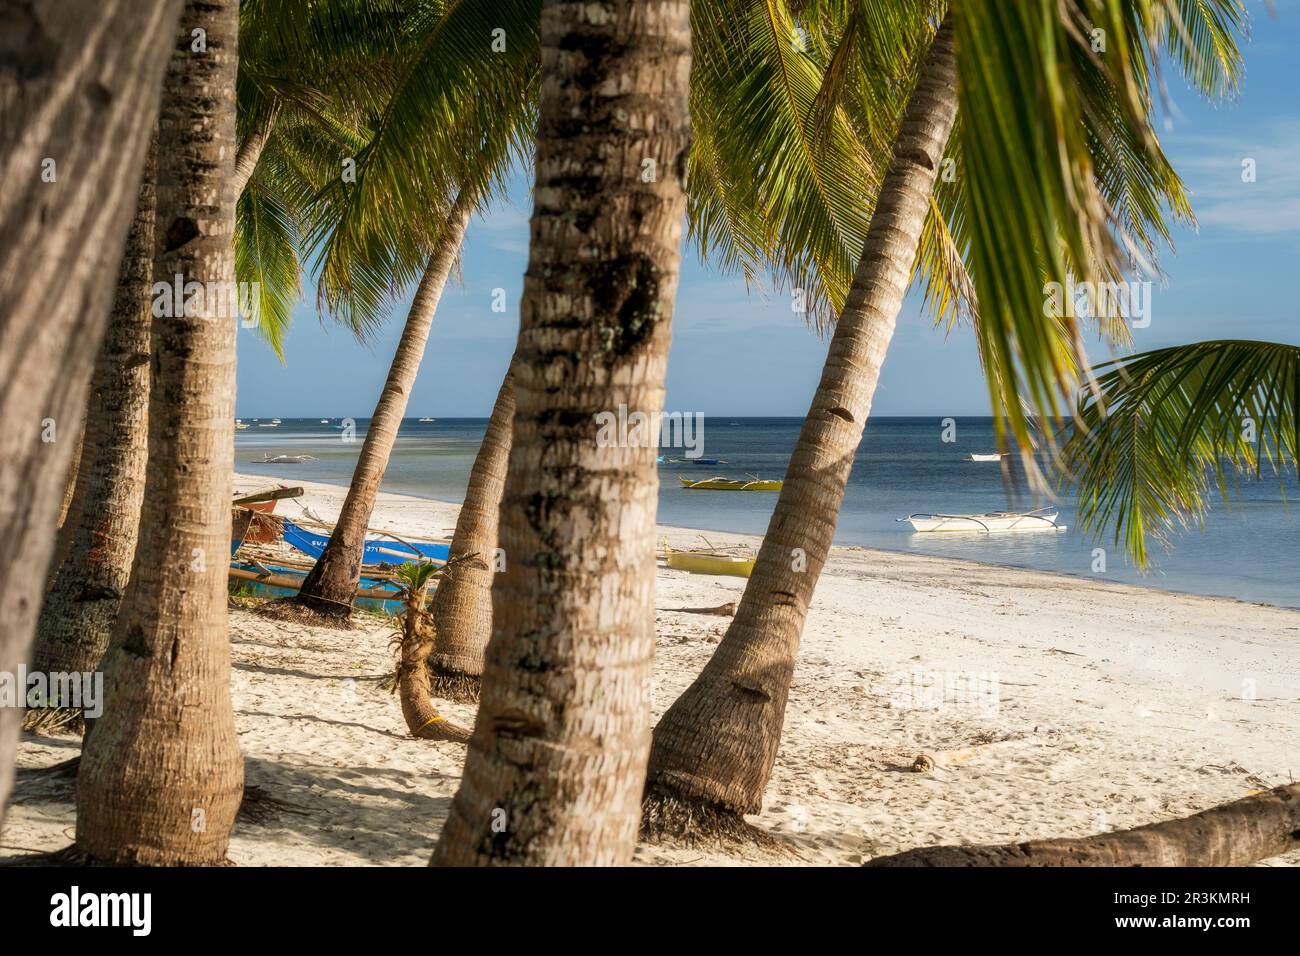 Siquijor Island Philippines with Palm trees and beach Stock Photo